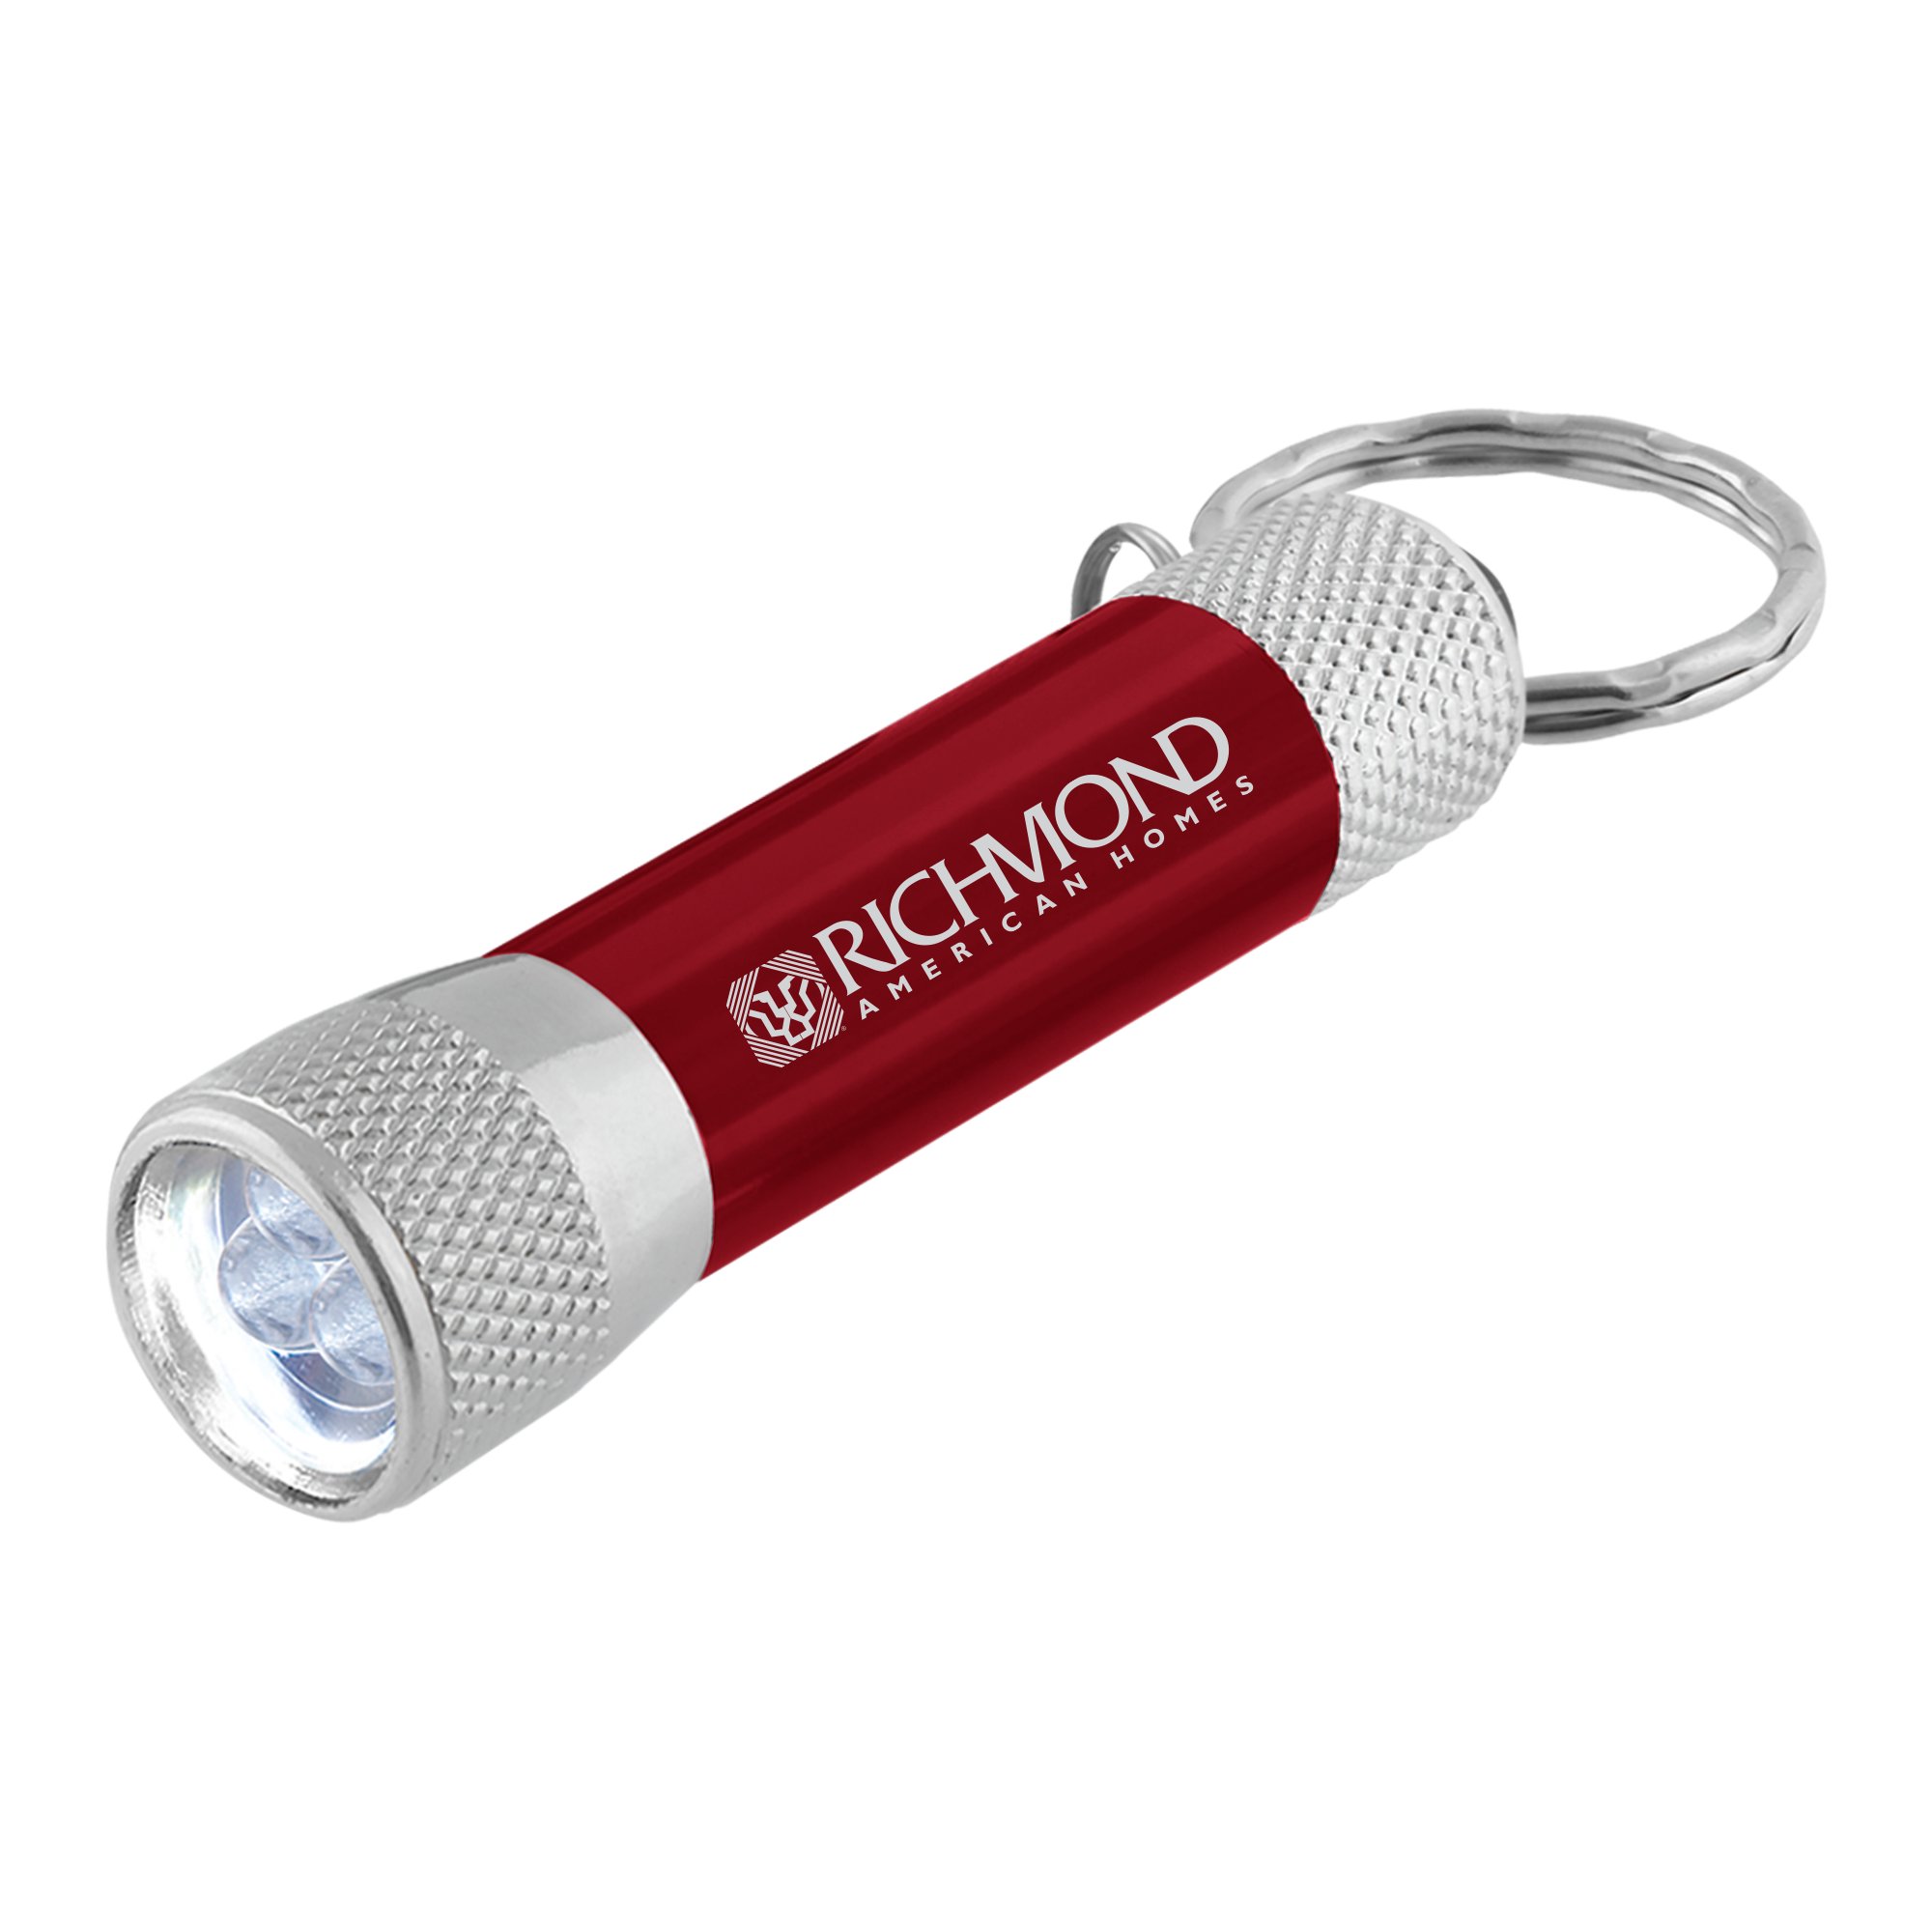 'Proud Of You' Keyring LED Torch KT00006570